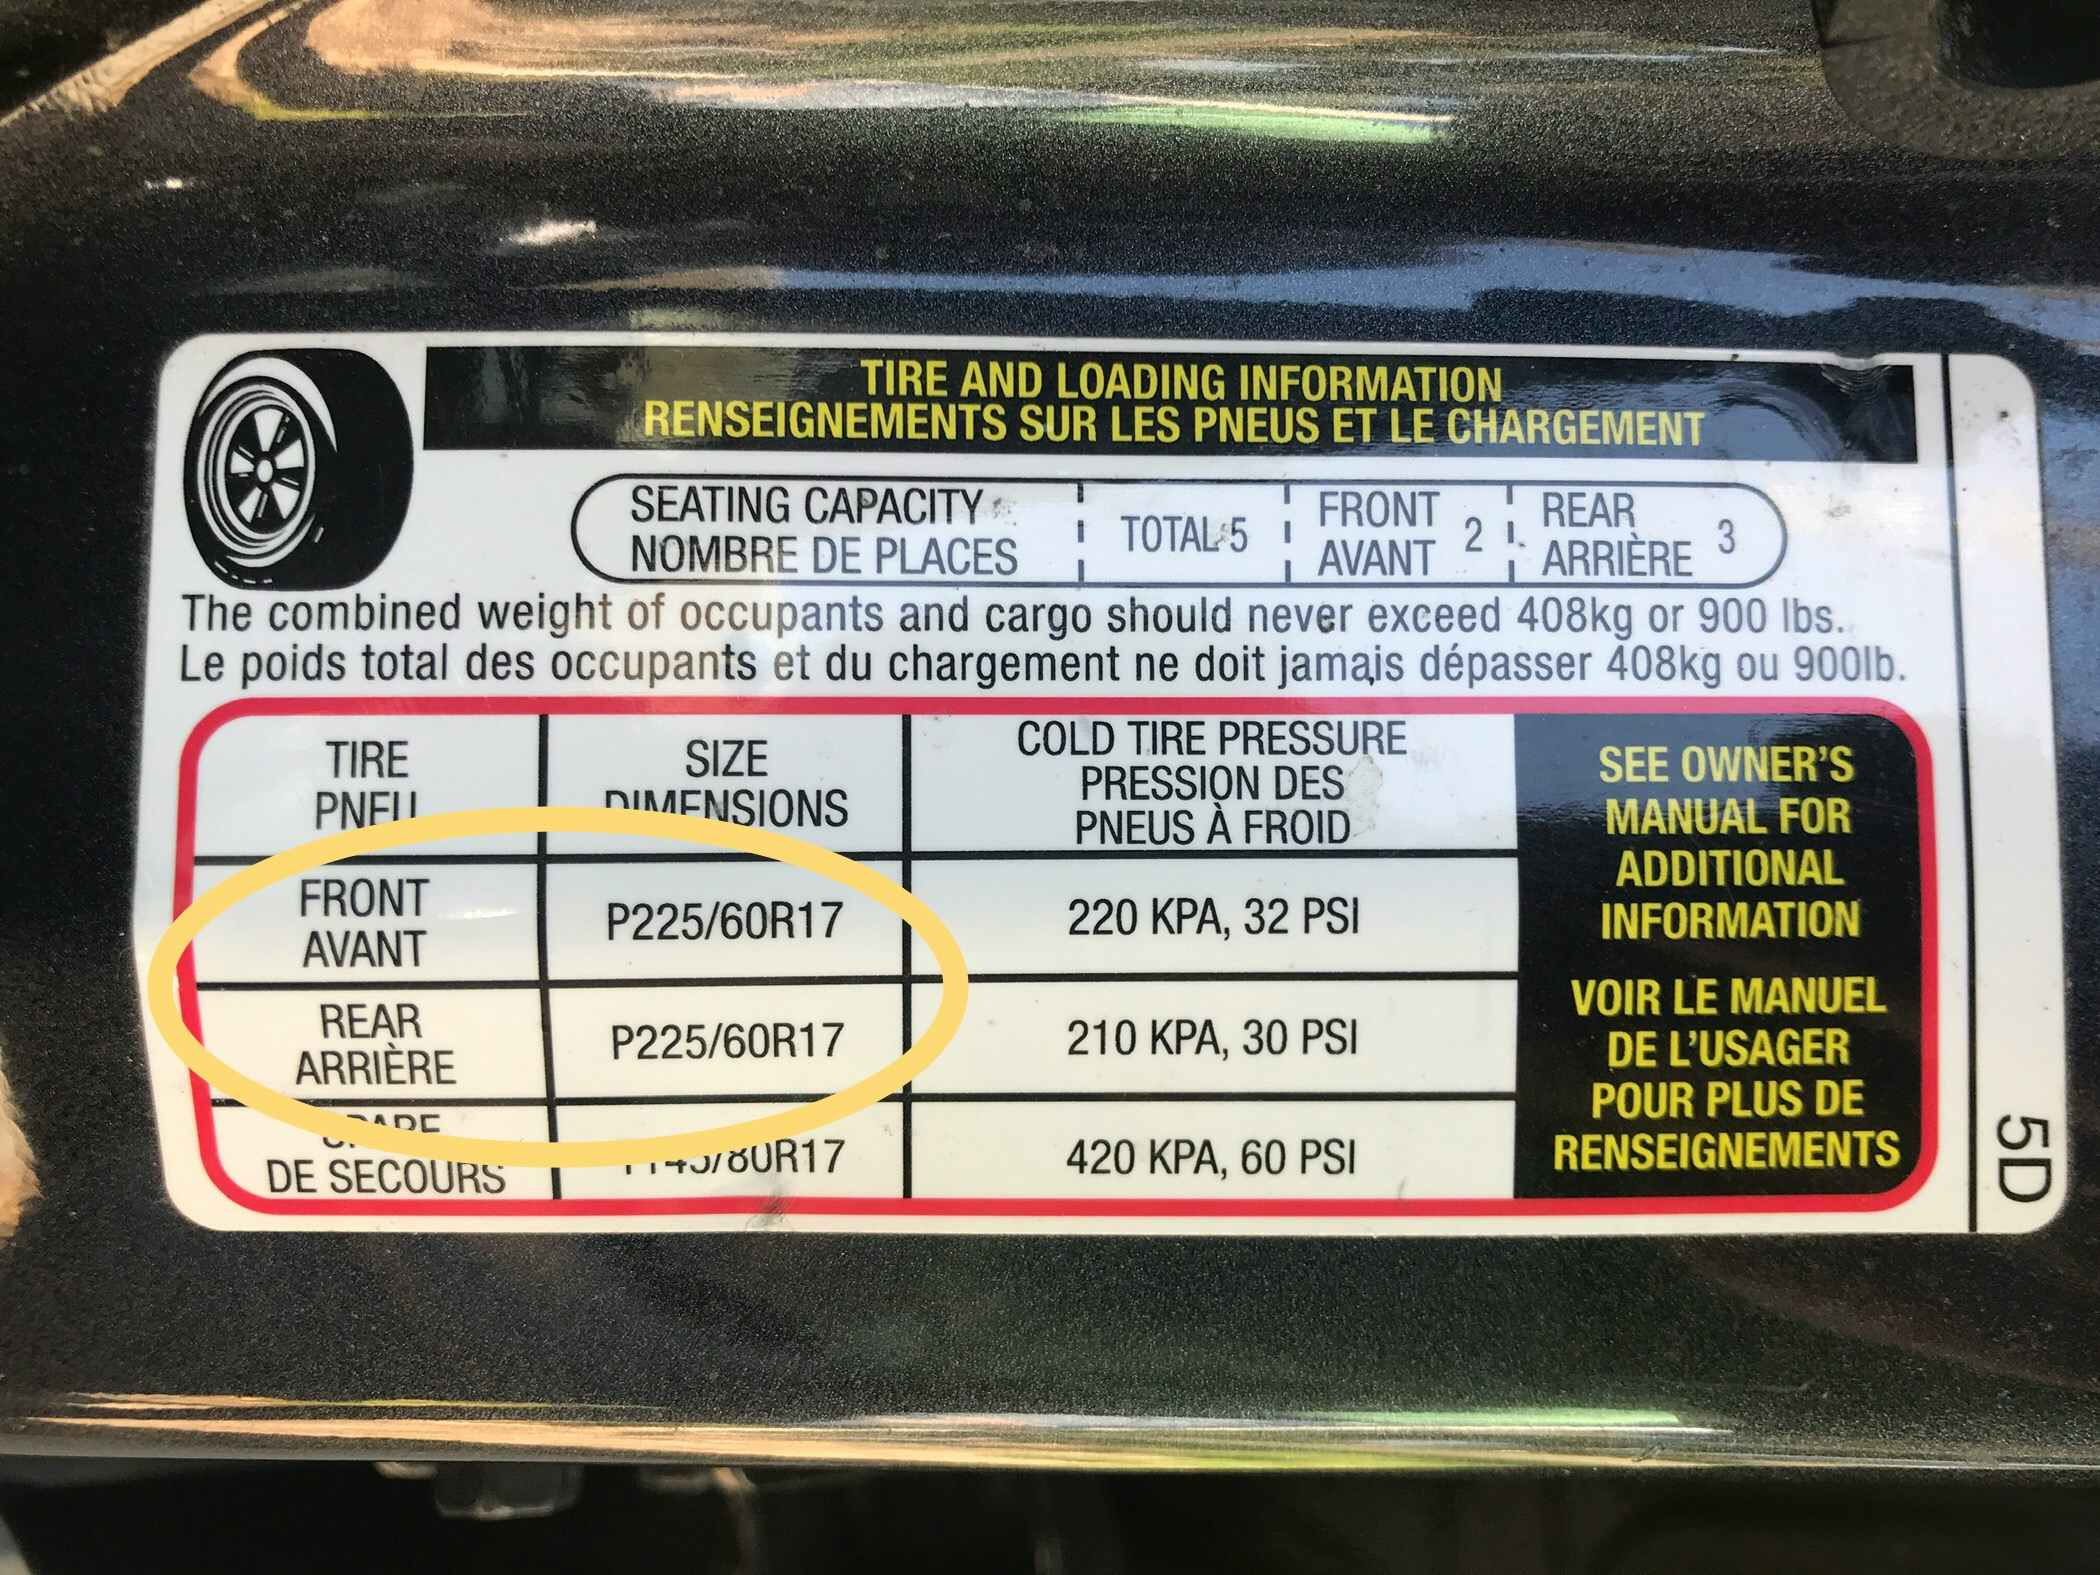 sticker on inside of car door shows tire size